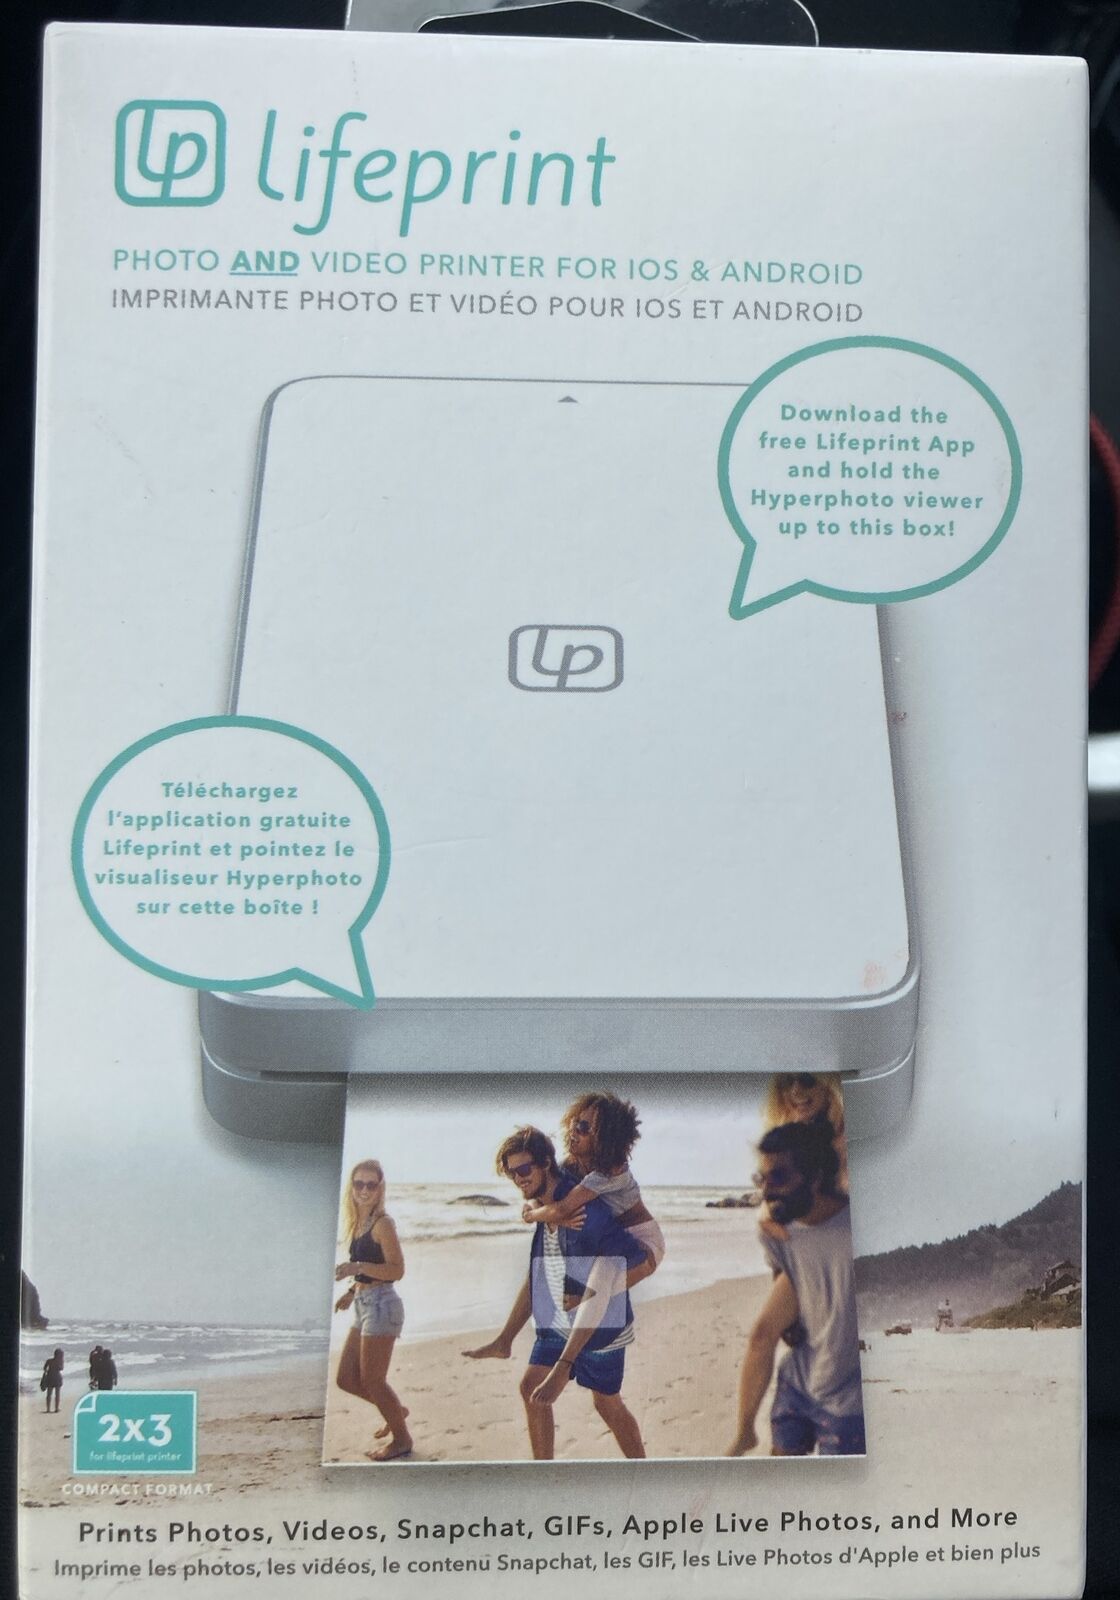 Lifeprint 2x3 Portable Photo and Video Printer for iPhone and Android